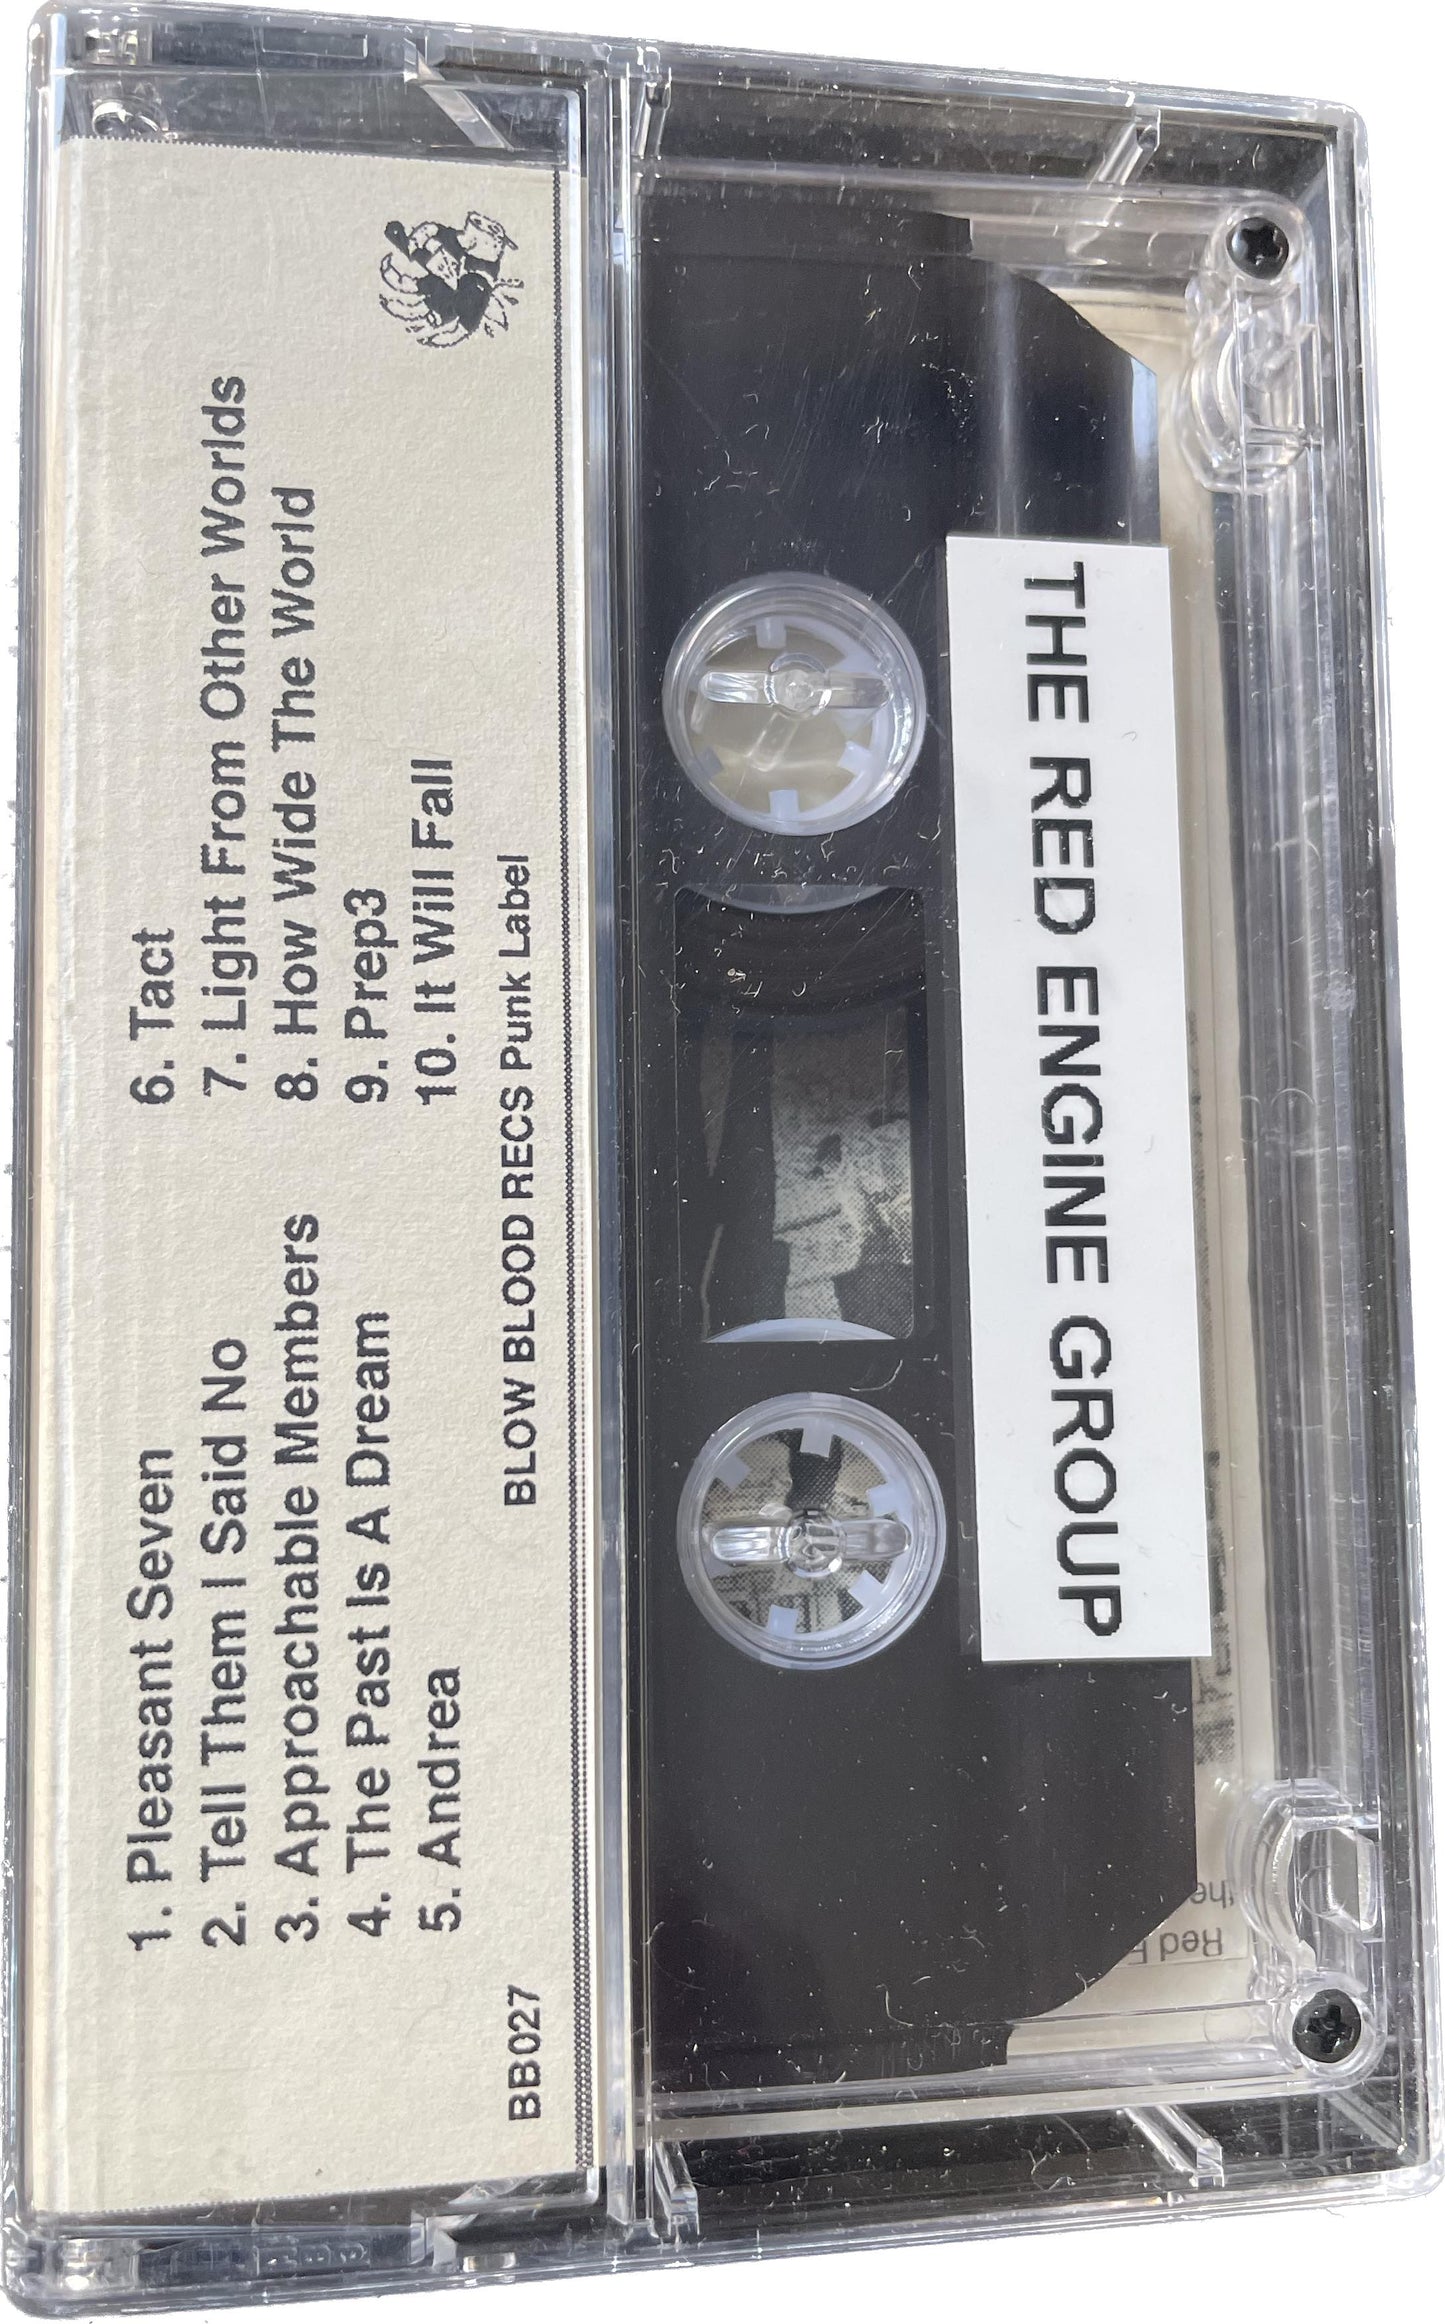 Red Engine Group "2" Cassette